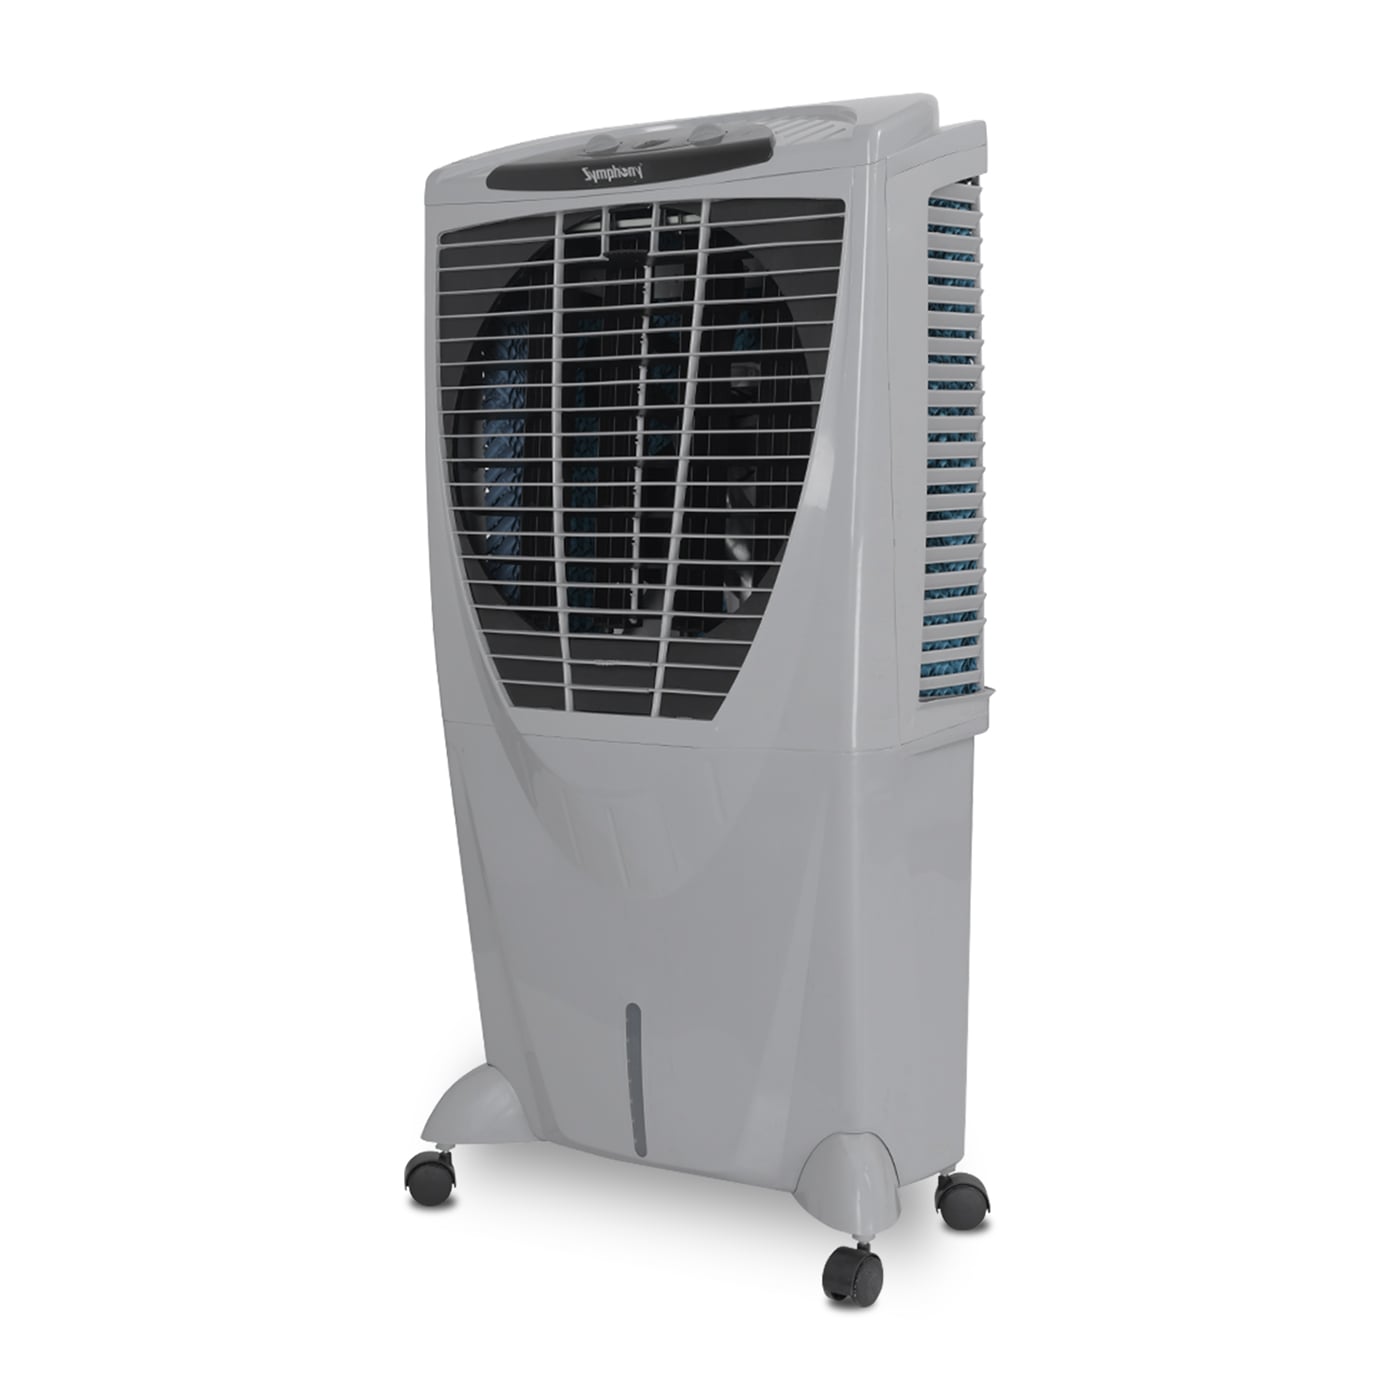 Top-rated 80-litre desert air coolers with ergonomic cooler fan